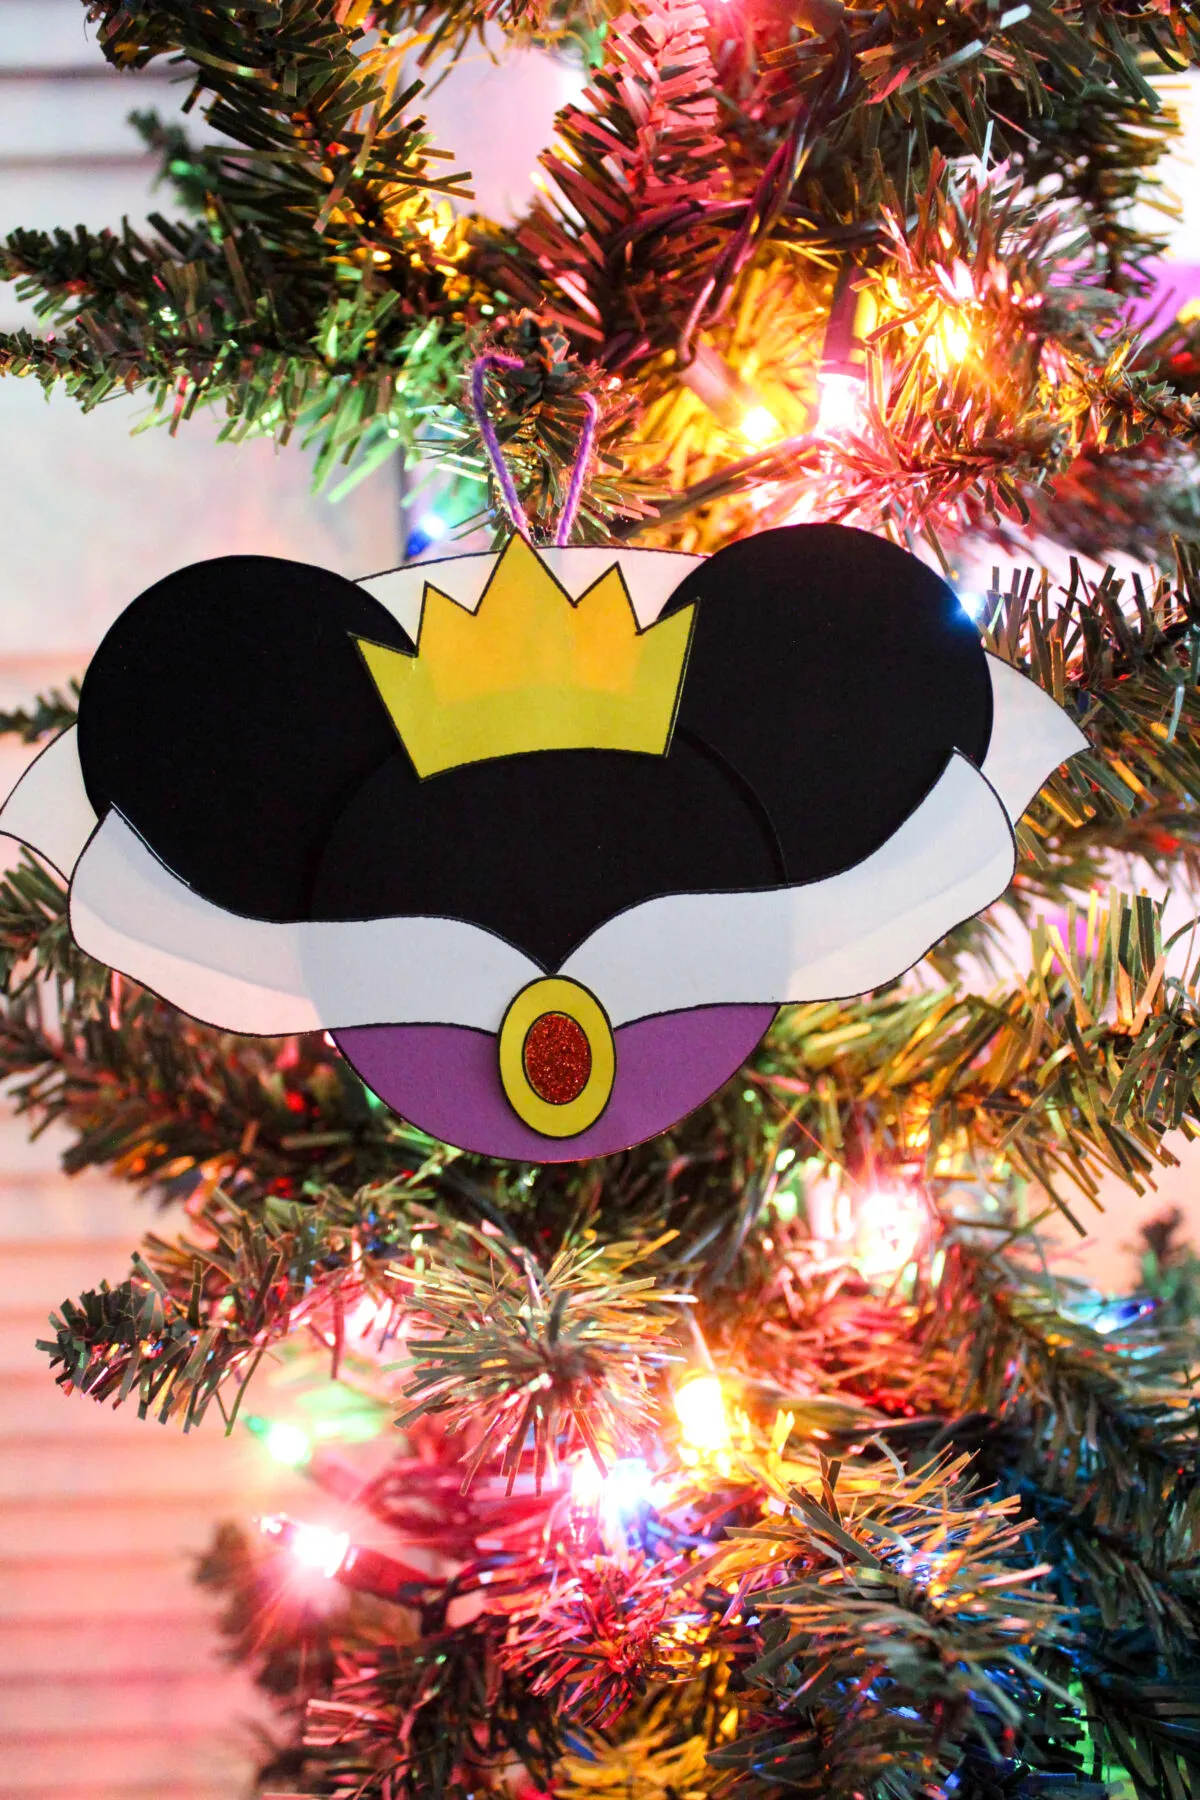 Make a quick & easy DIY Evil Queen Mickey Ears Ornament for your Christmas tree! Instructions and free printable template included.